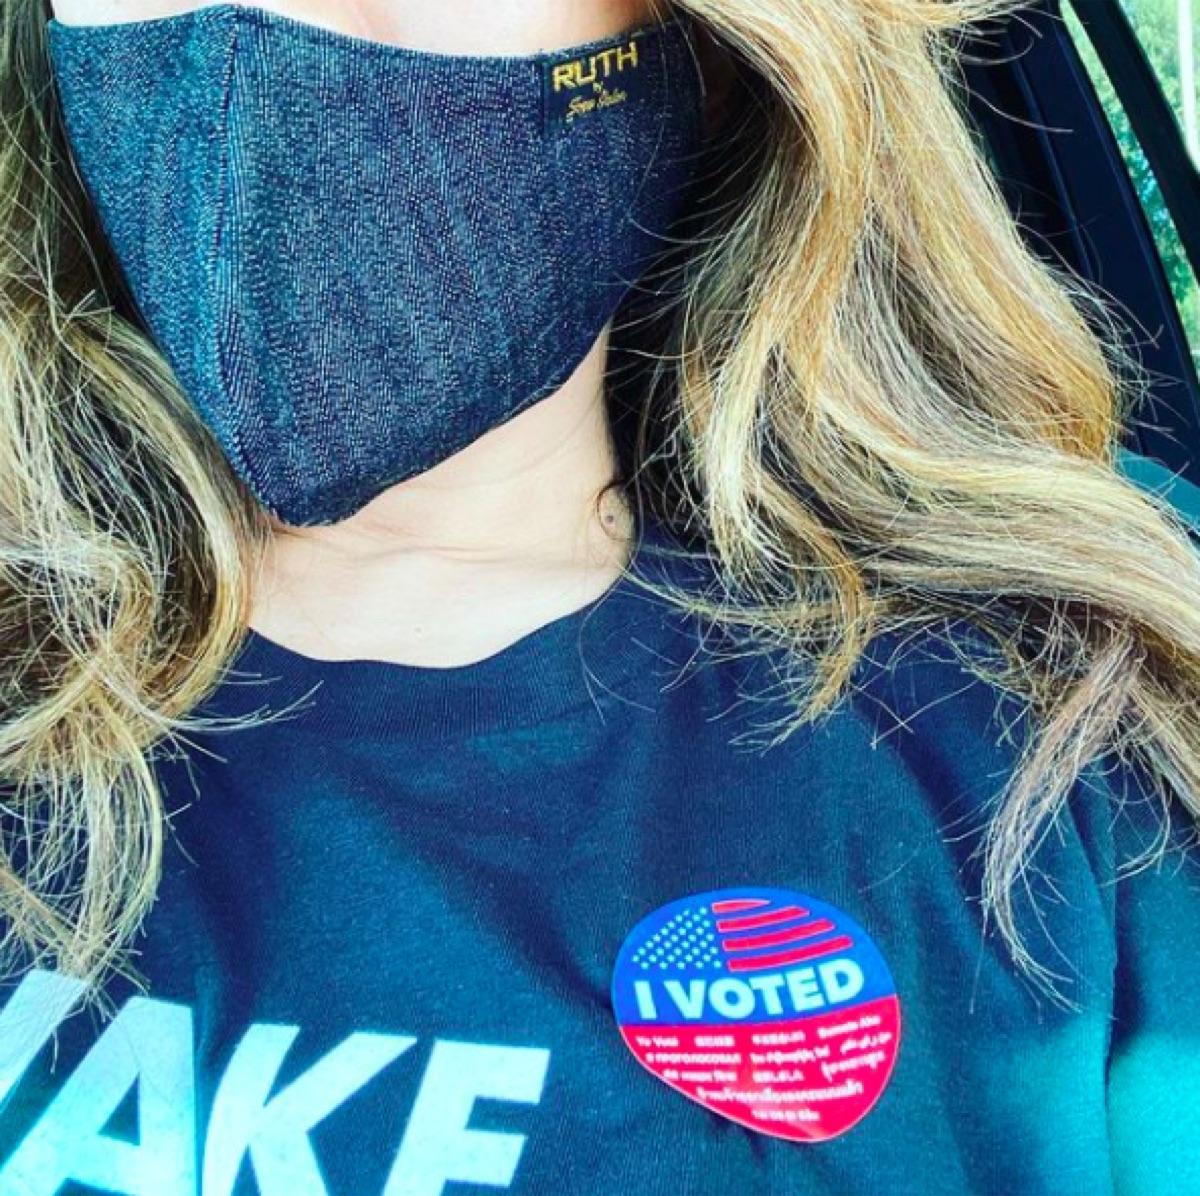 Carrie Ann Inaba wearing a mask to vote